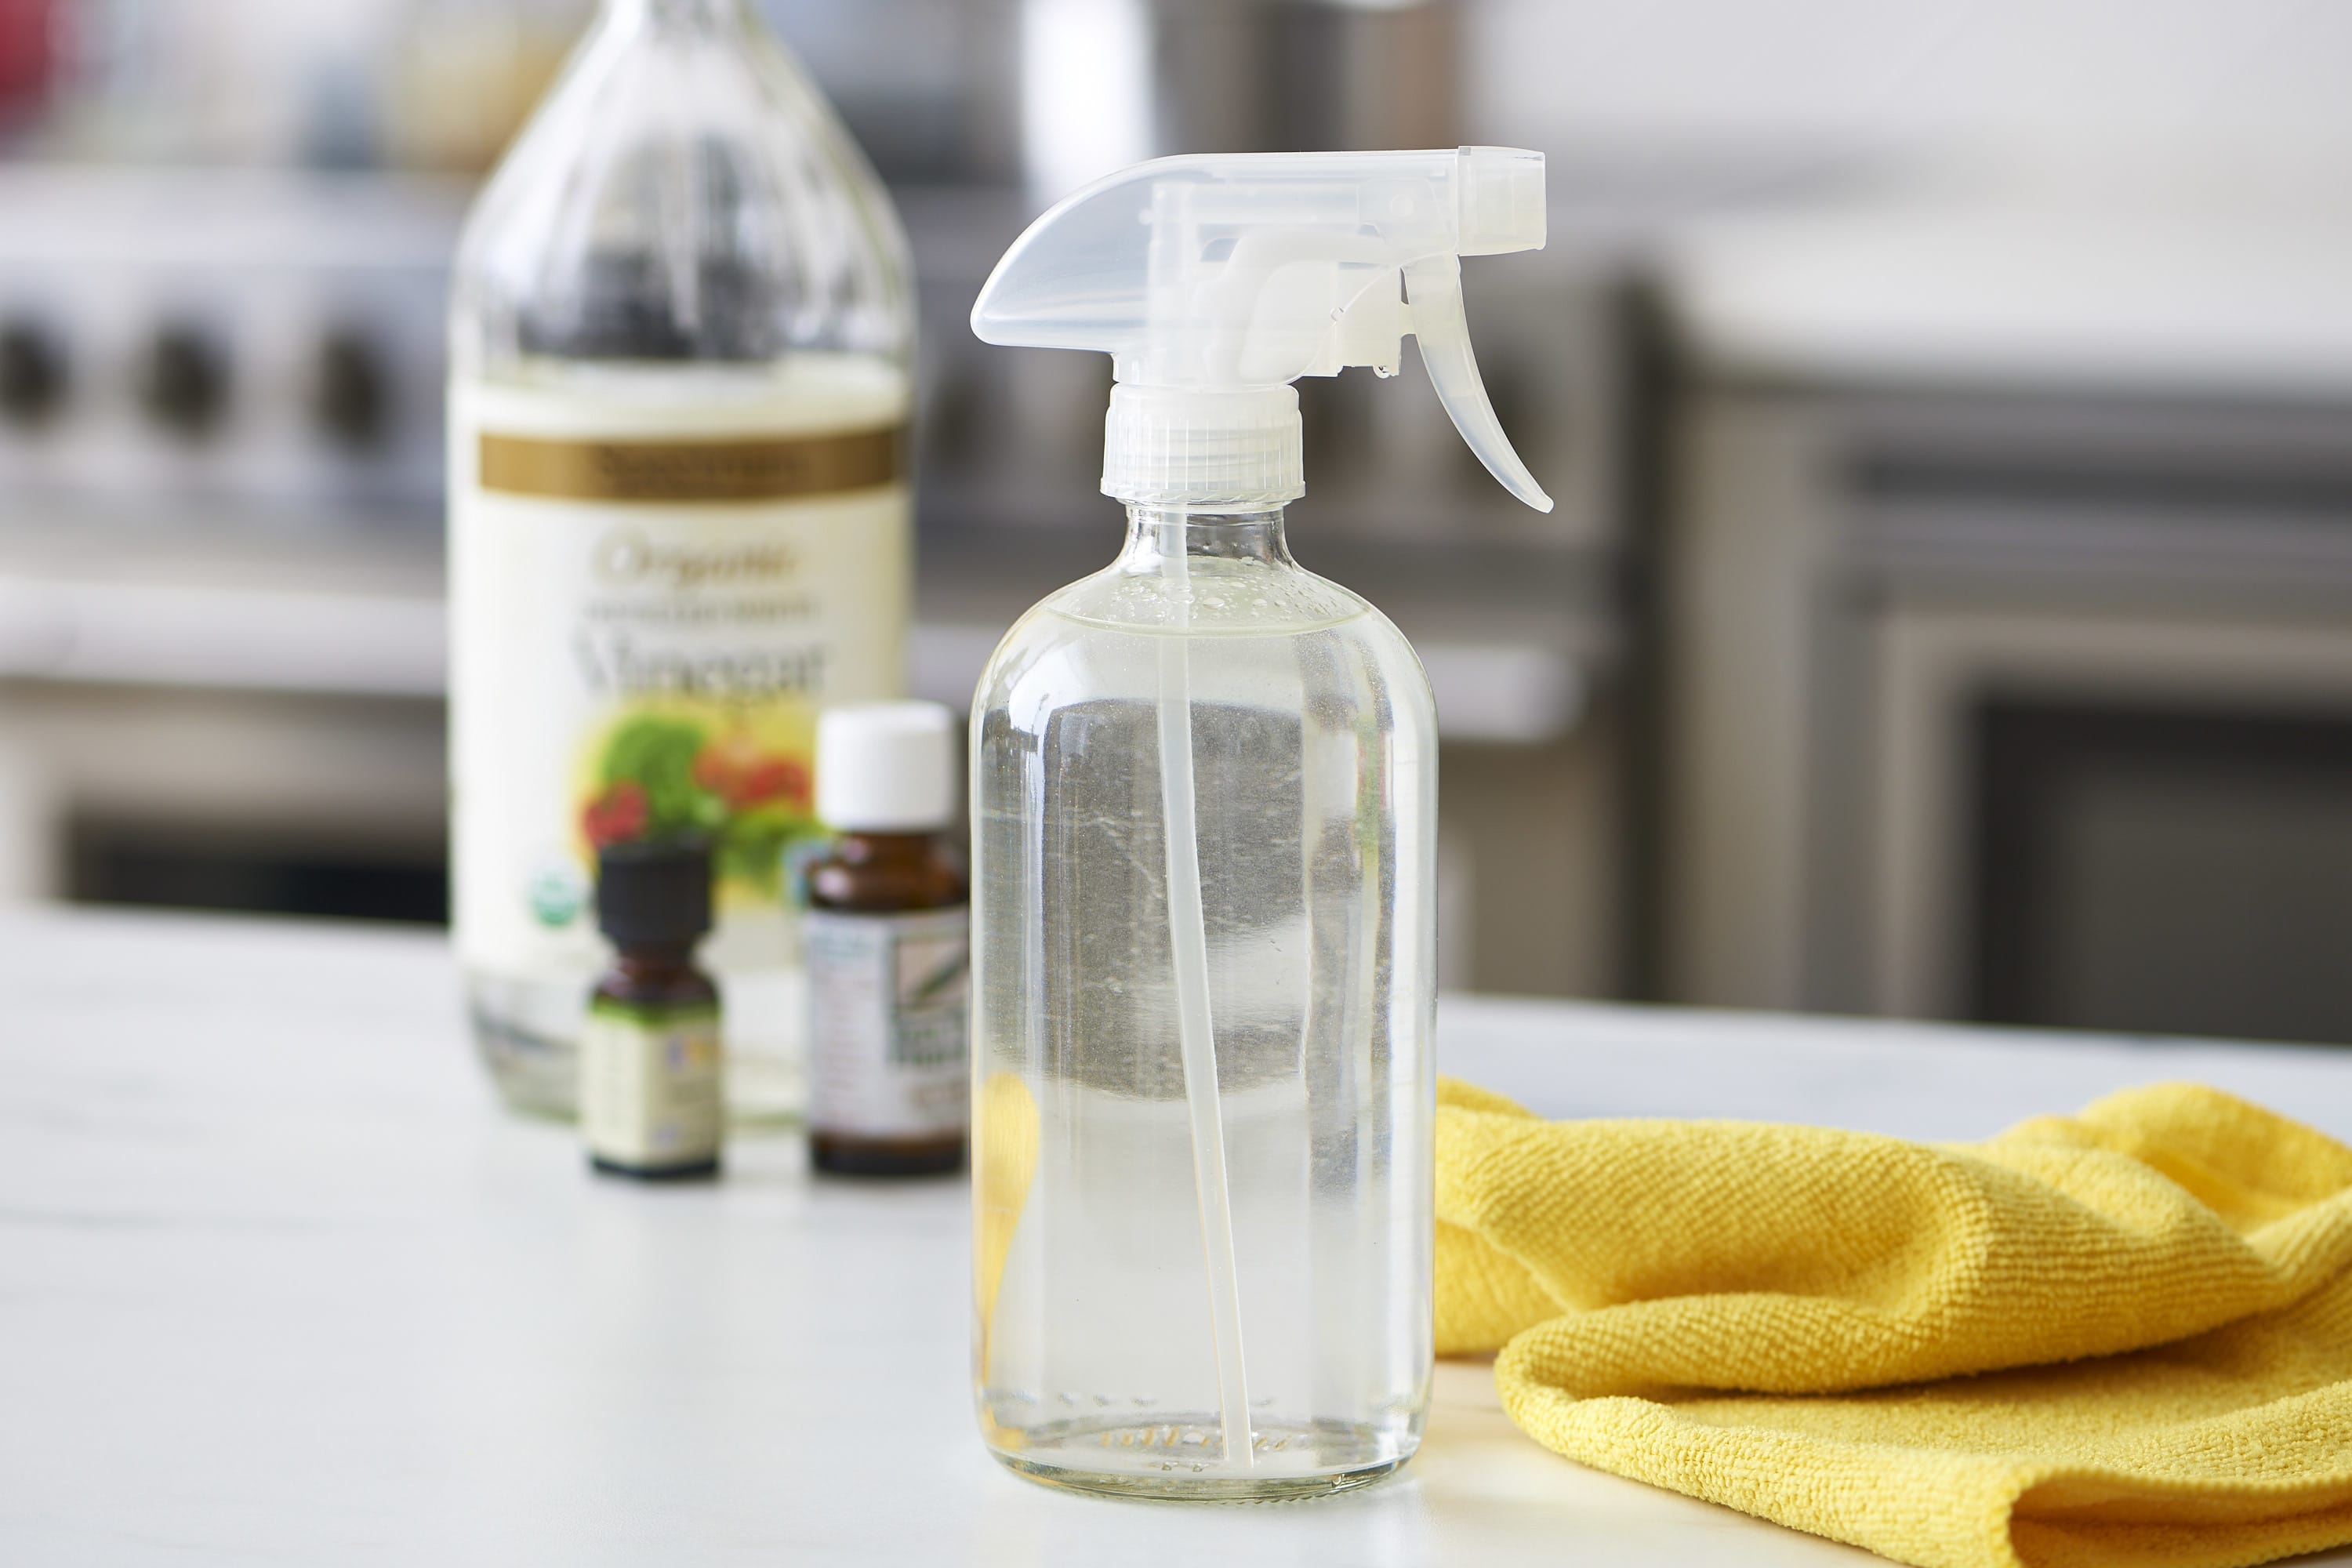 At Home Clean Glass Cleaner Spray - At Home Essentials